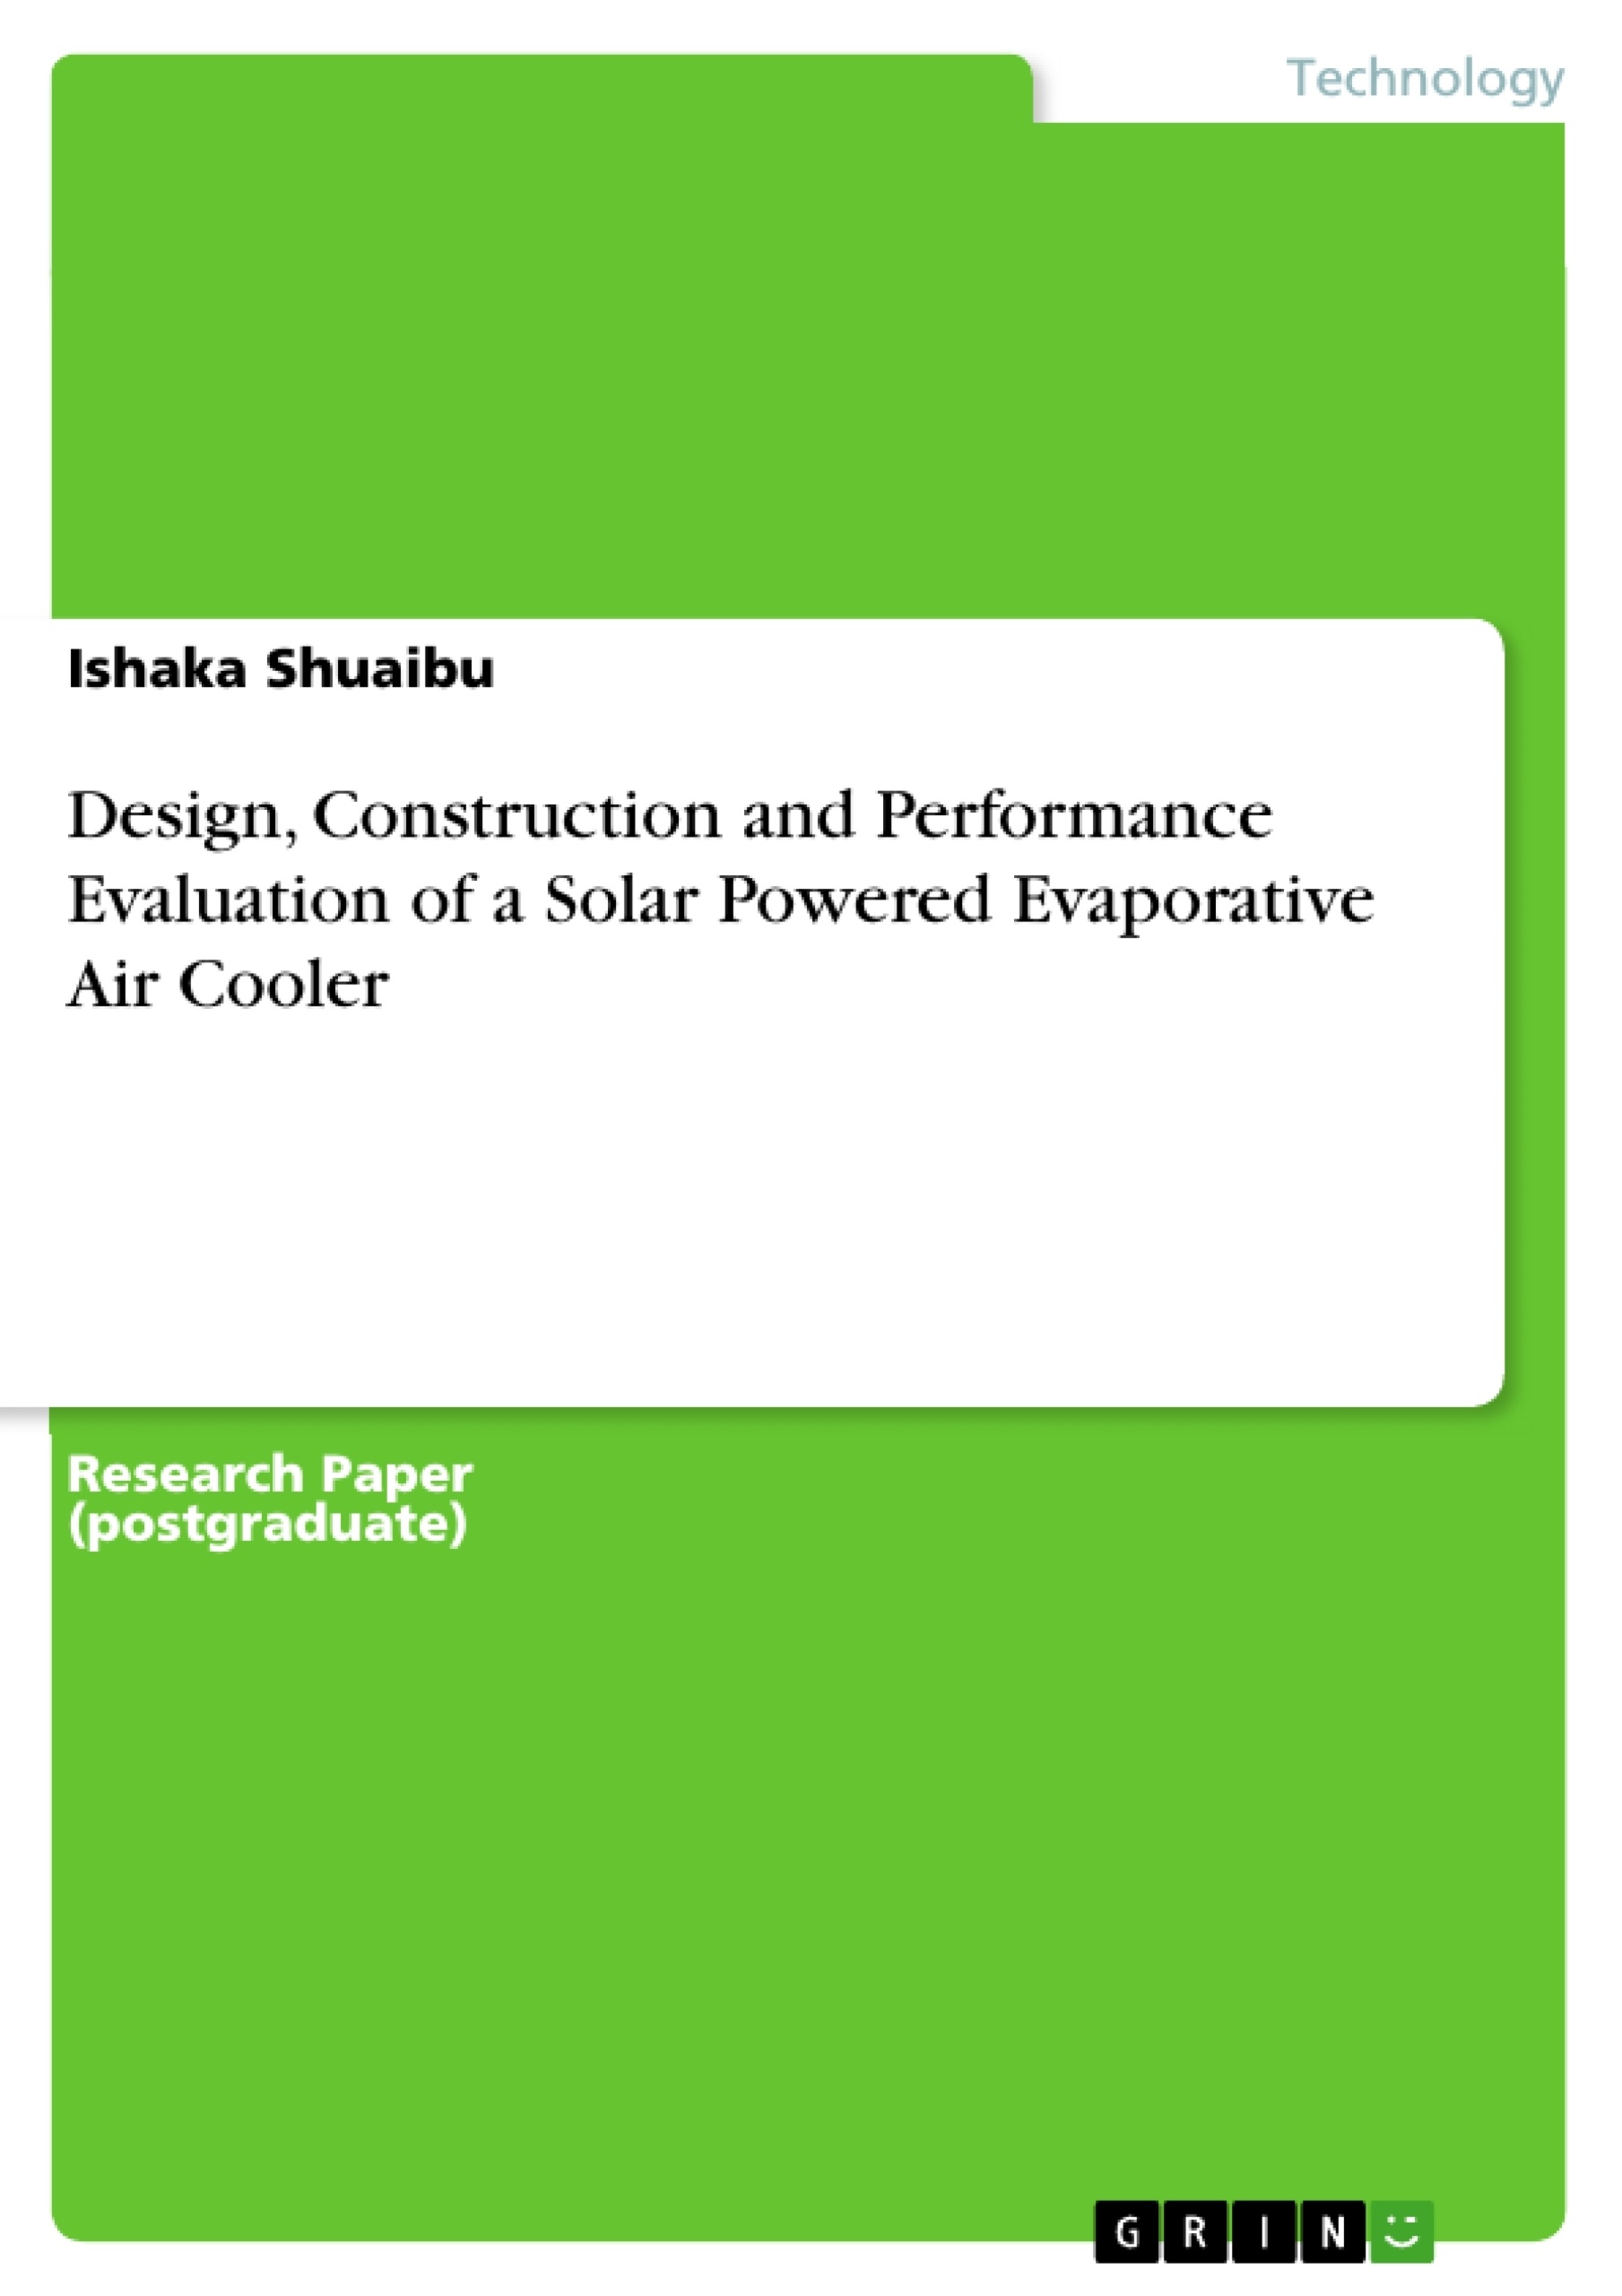 Title: Design, Construction and Performance Evaluation of a Solar Powered Evaporative Air Cooler